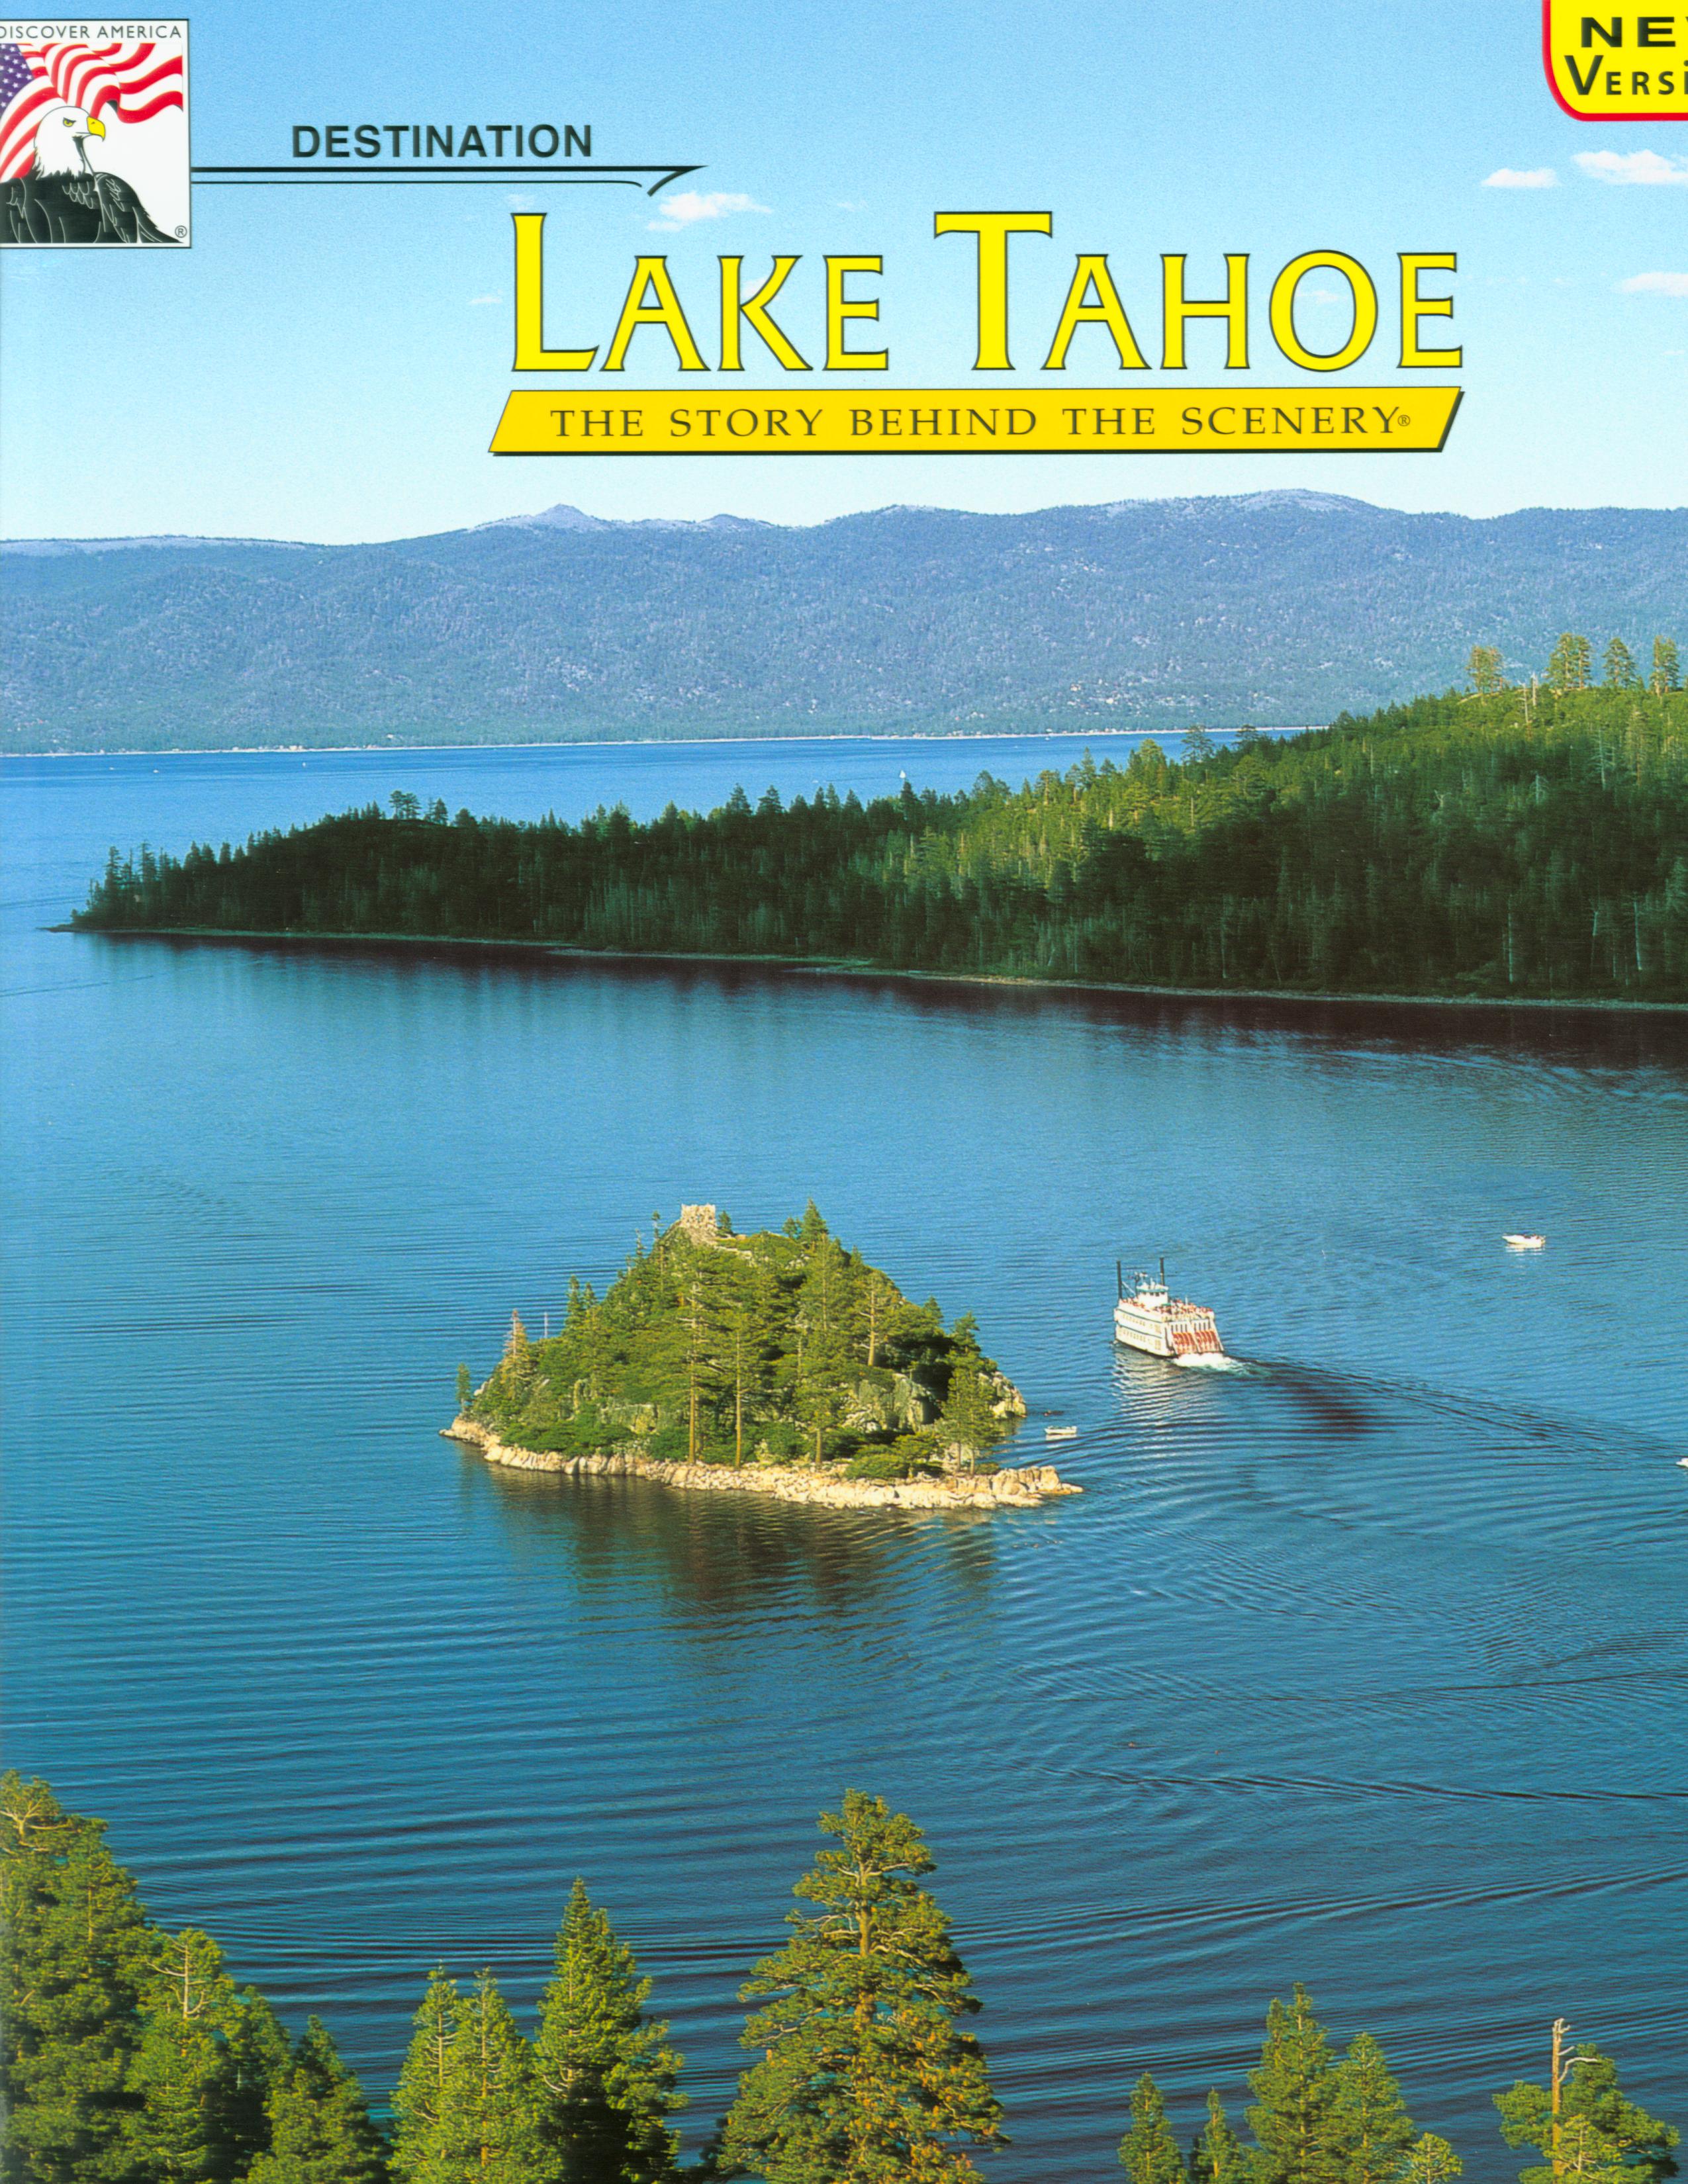 LAKE TAHOE: the story behind the scenery (CA/NV). 